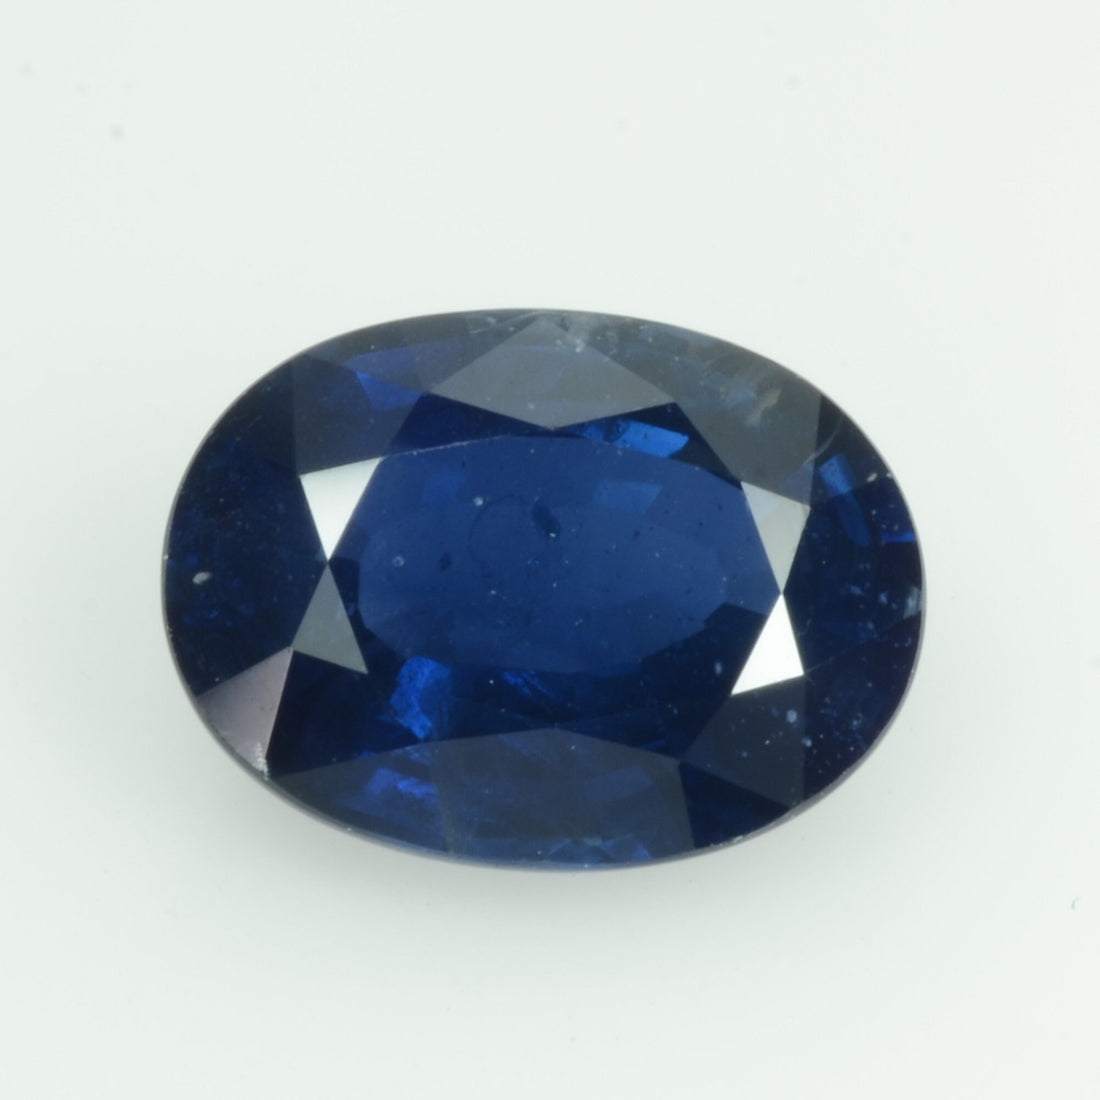 2.08 cts natural blue sapphire loose gemstone oval cut